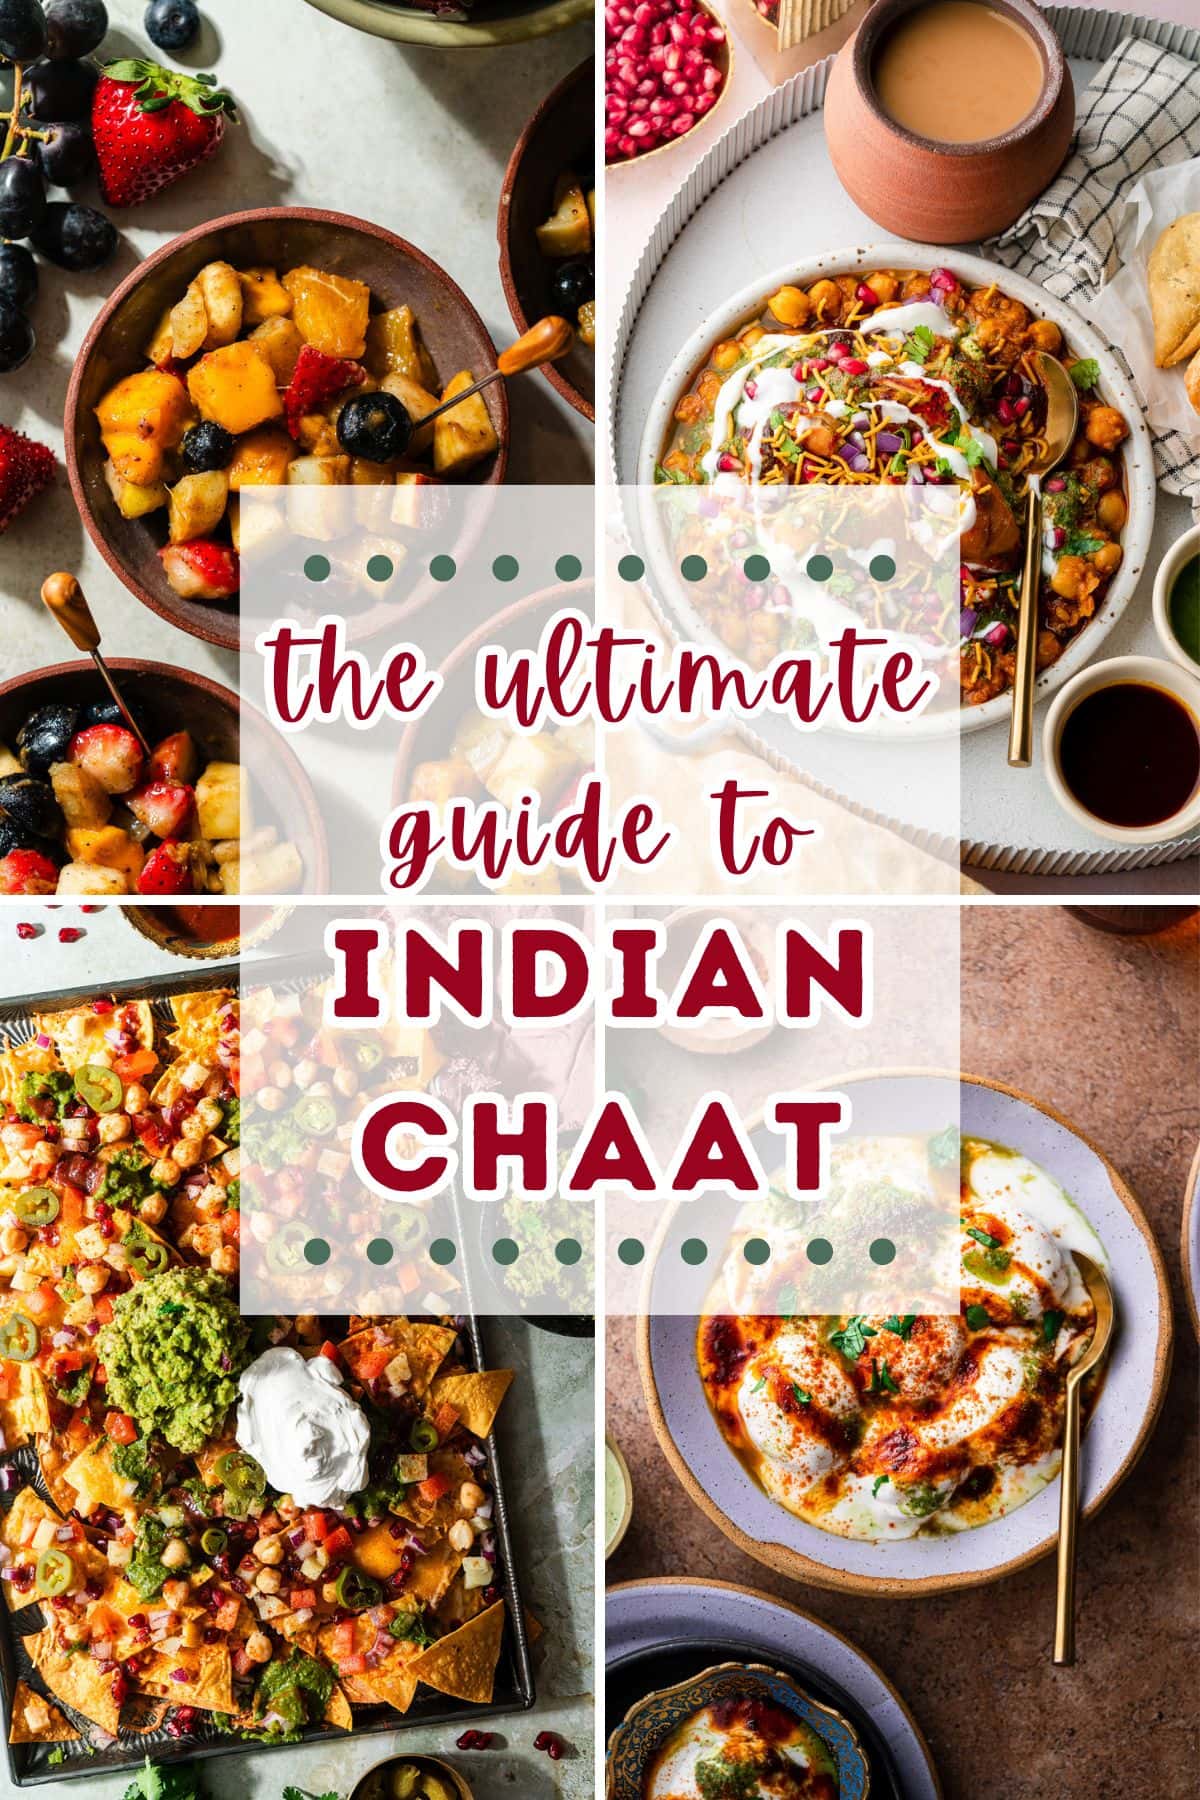 Fruit chaat, samosa chaat, nachos chaat, and dahi vada chaat with a text overlay "the ultimate guide to Indian Chaat".